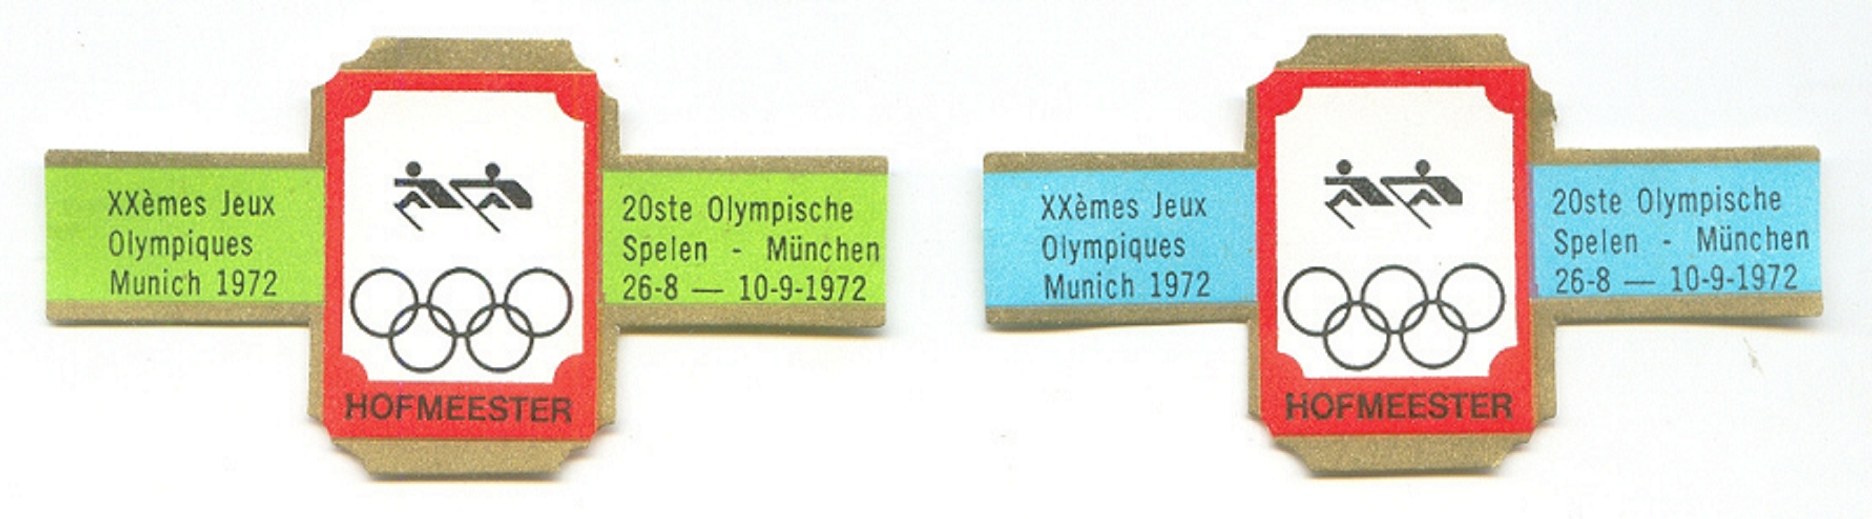 Cigar label NED Hofmeester 20th Olympic Games Munic with pictogram No. 3 green and blue colours on band